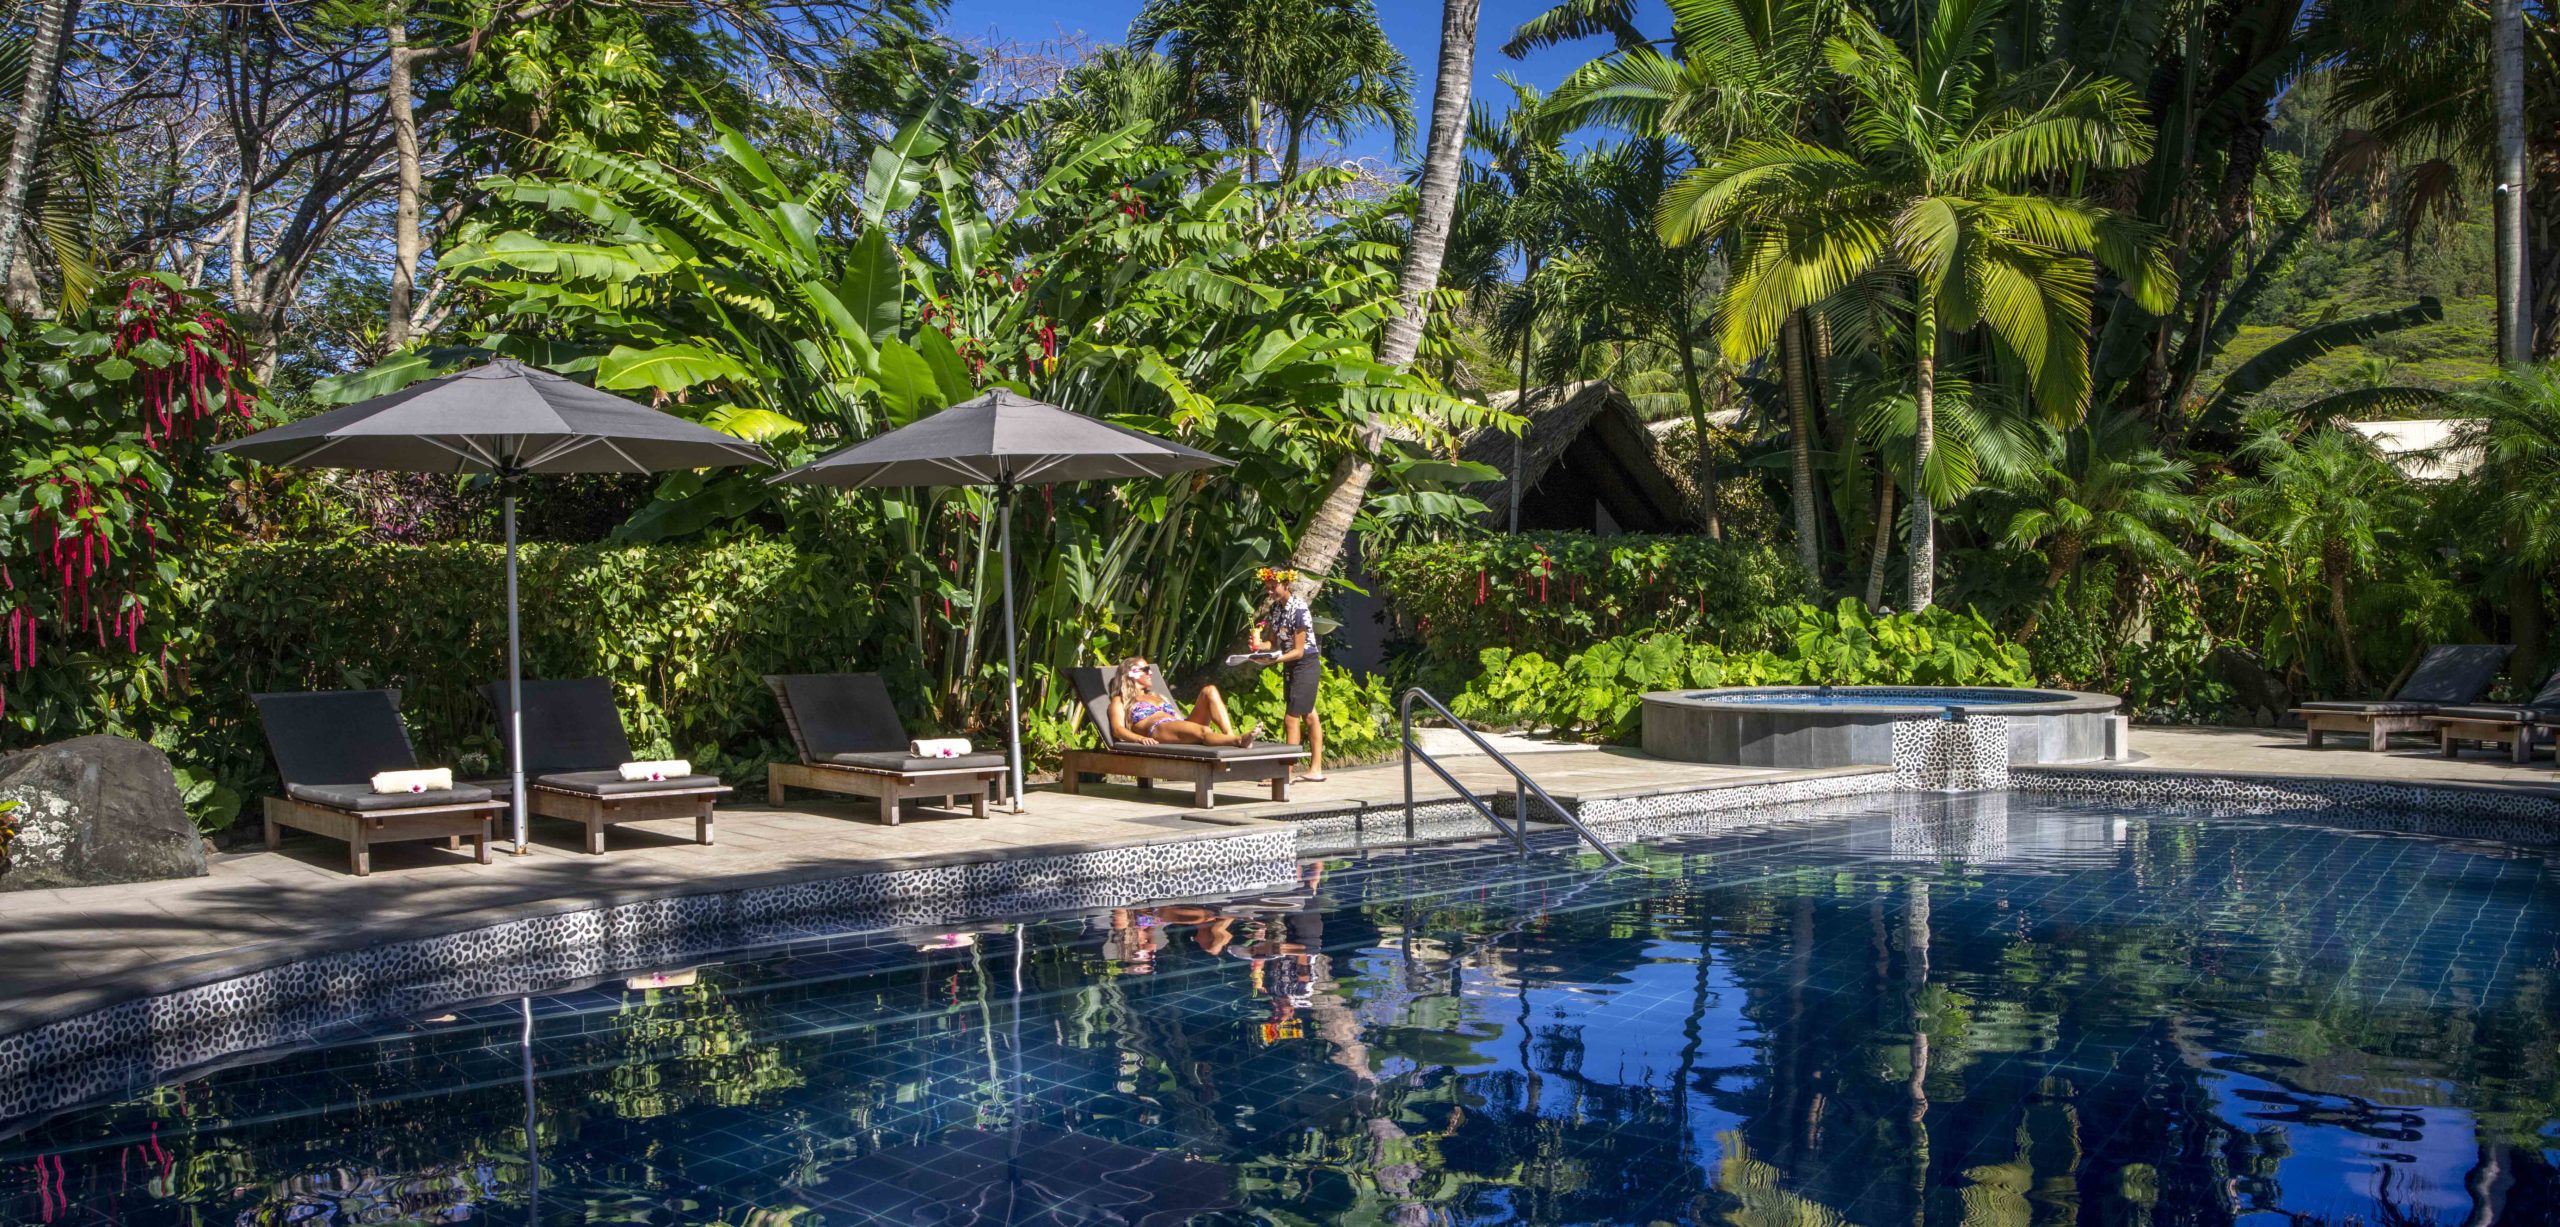 Resort guest relaxes on a sun lounge by the swimming pool, situated amidst the tropical lush garden for more privacy